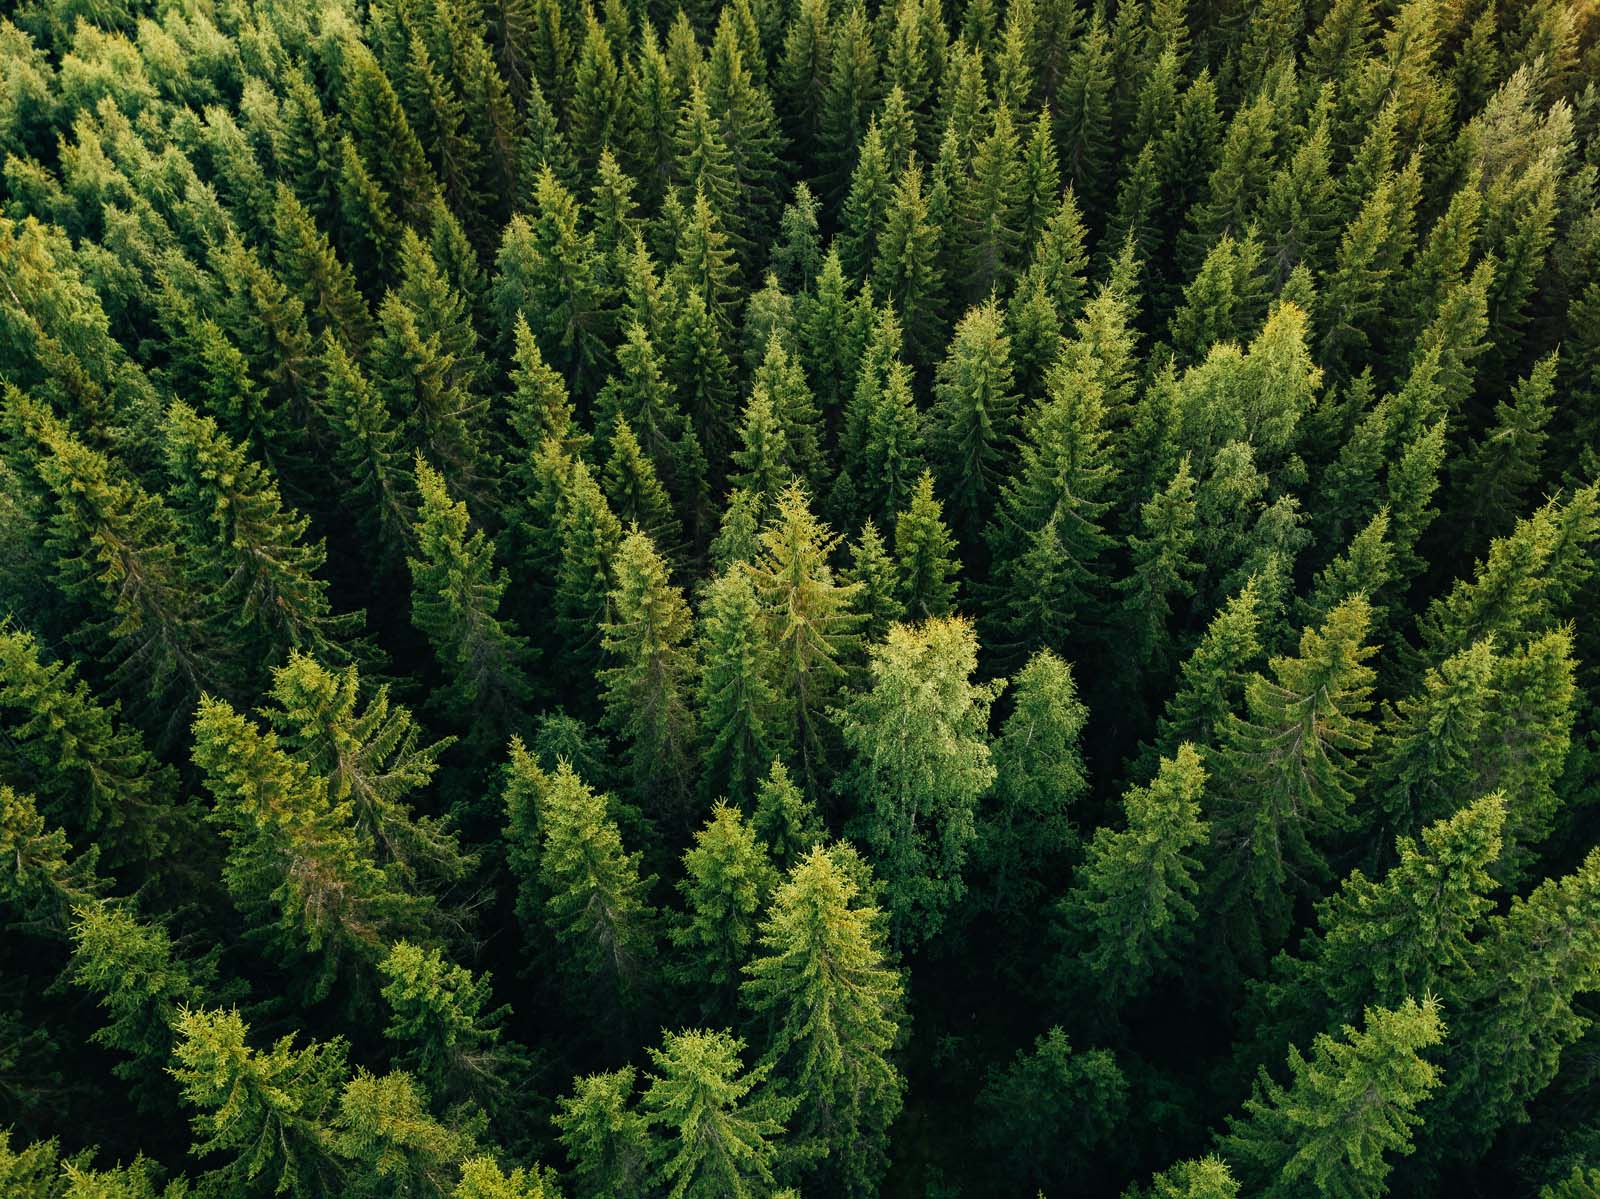 aerial view of trees in a dense forest